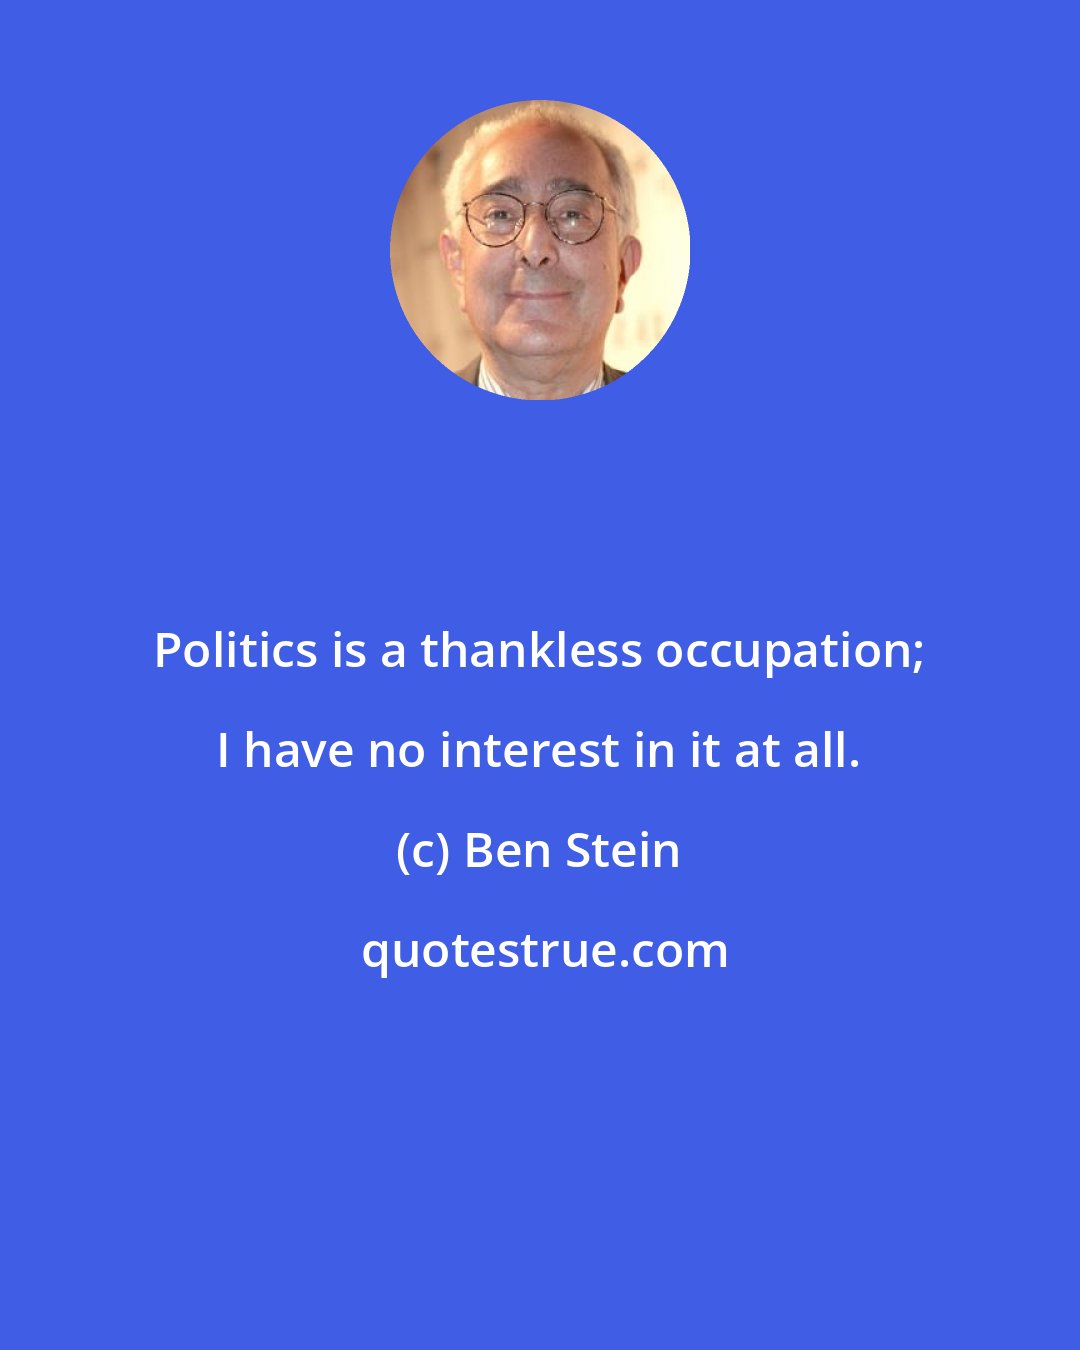 Ben Stein: Politics is a thankless occupation; I have no interest in it at all.